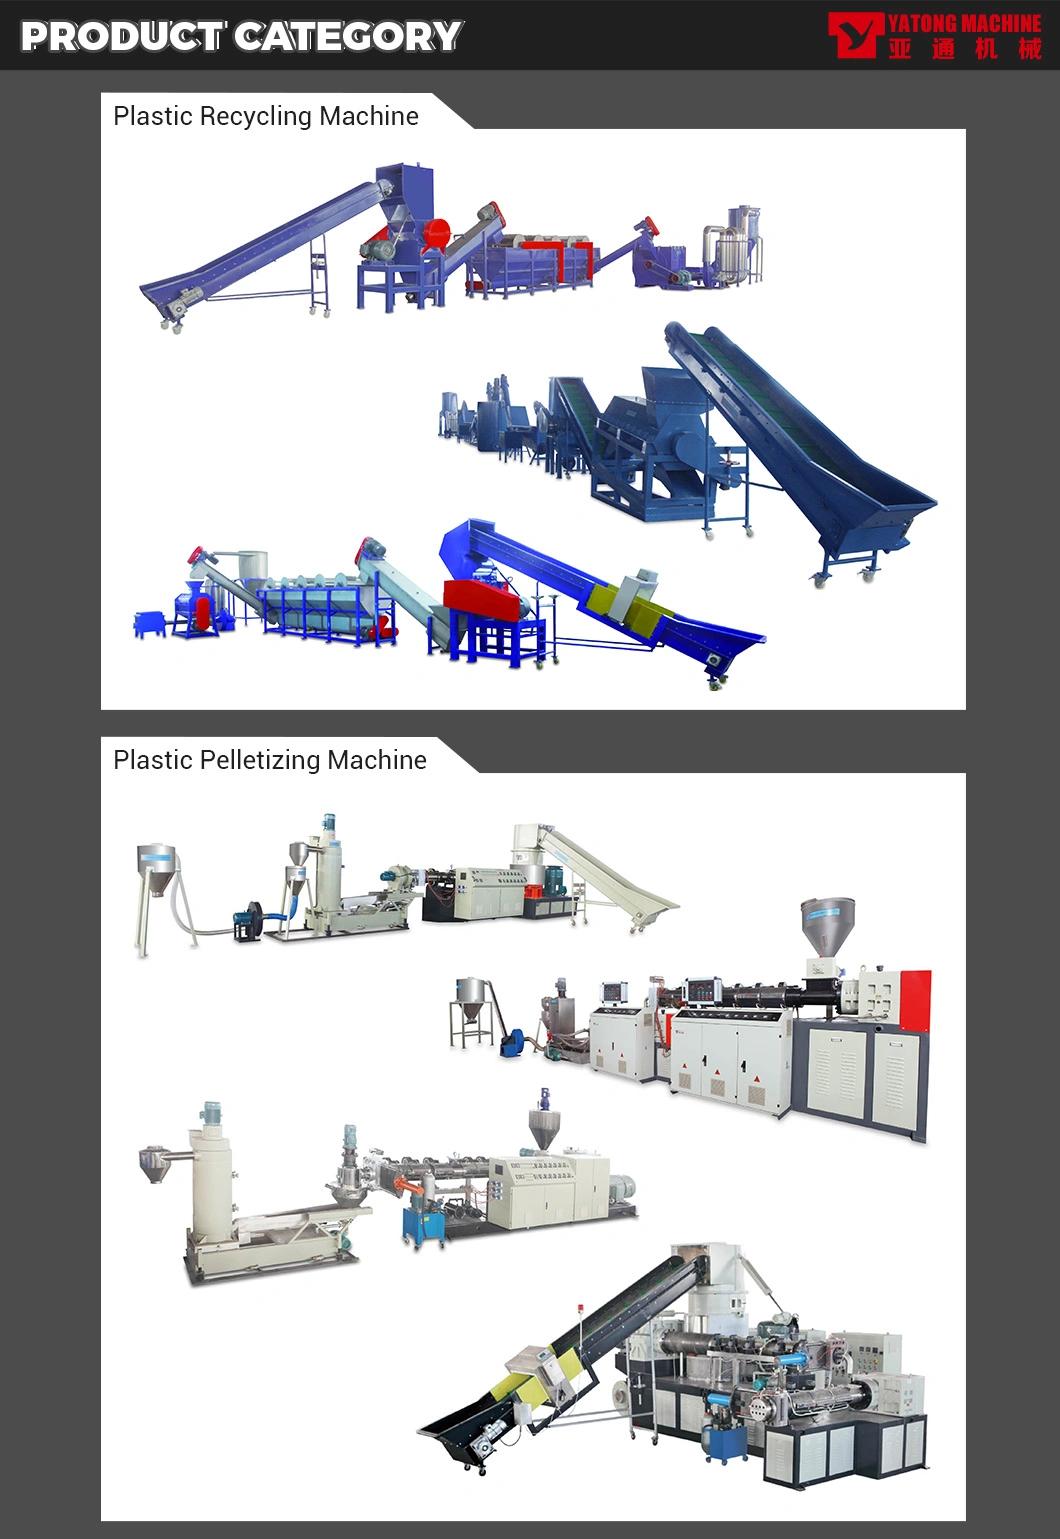 Yatong PVC/PE Fine Plastic Grinder Pulverizer with Film Packing